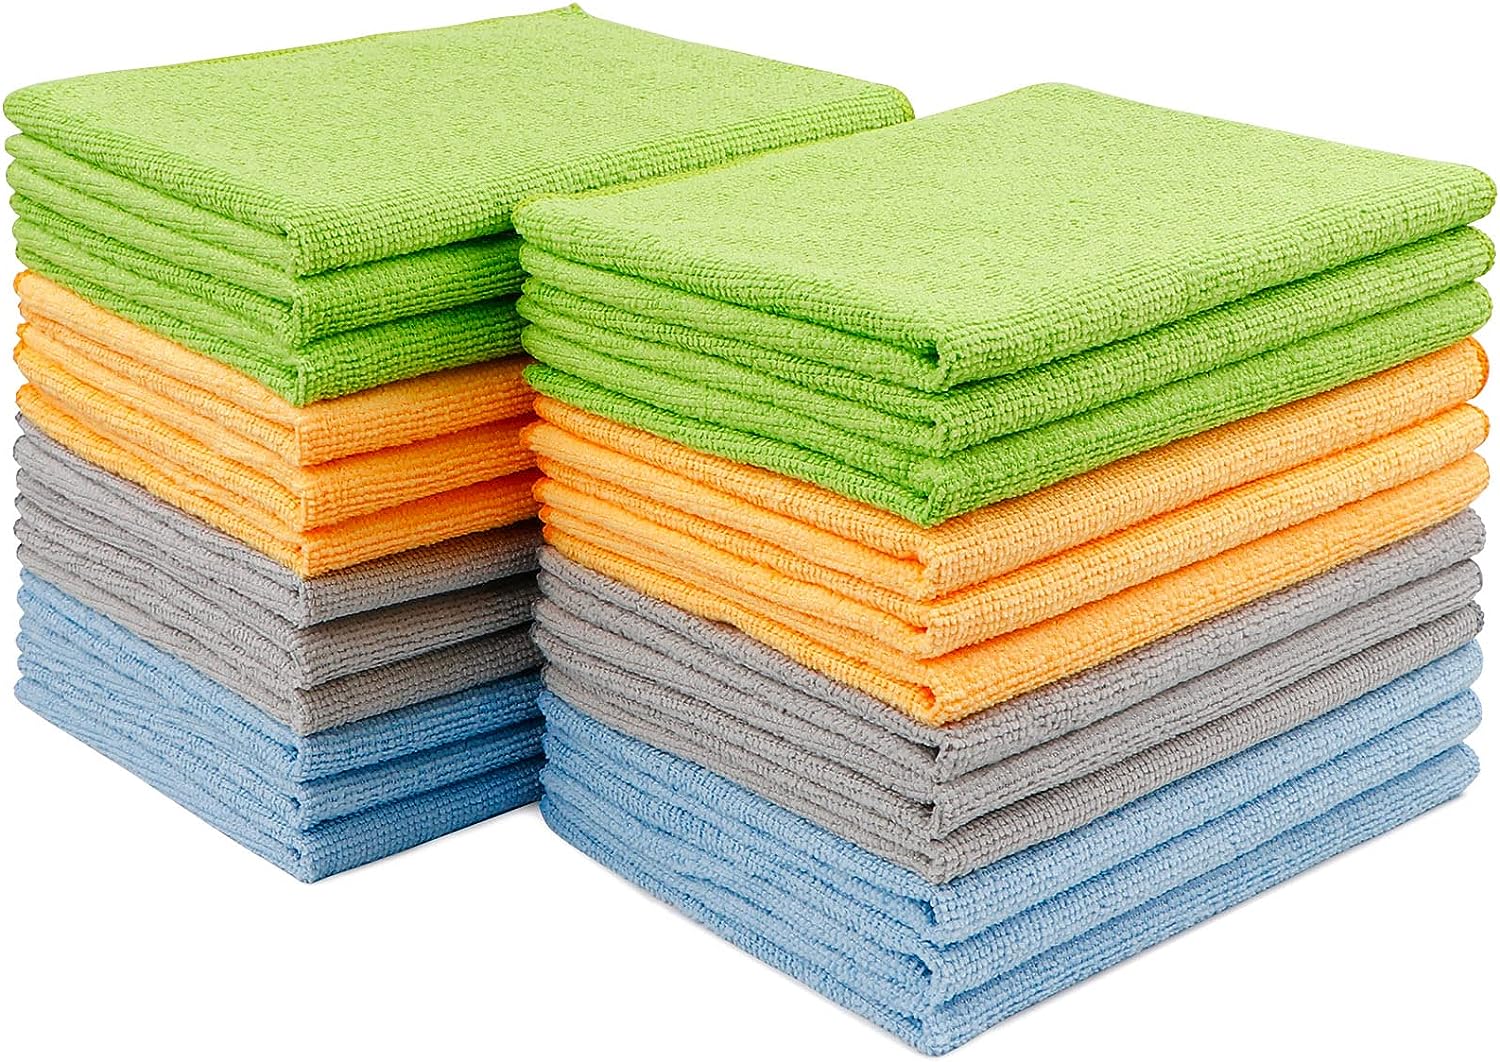 AIDEA Microfiber Cleaning Cloths-12PK, Softer Highly Absorbent, Lint Free  Streak Free for House, Kitchen, Car, Window Gifts(12in.x12in.)  Blue/Green/Grey 12x12